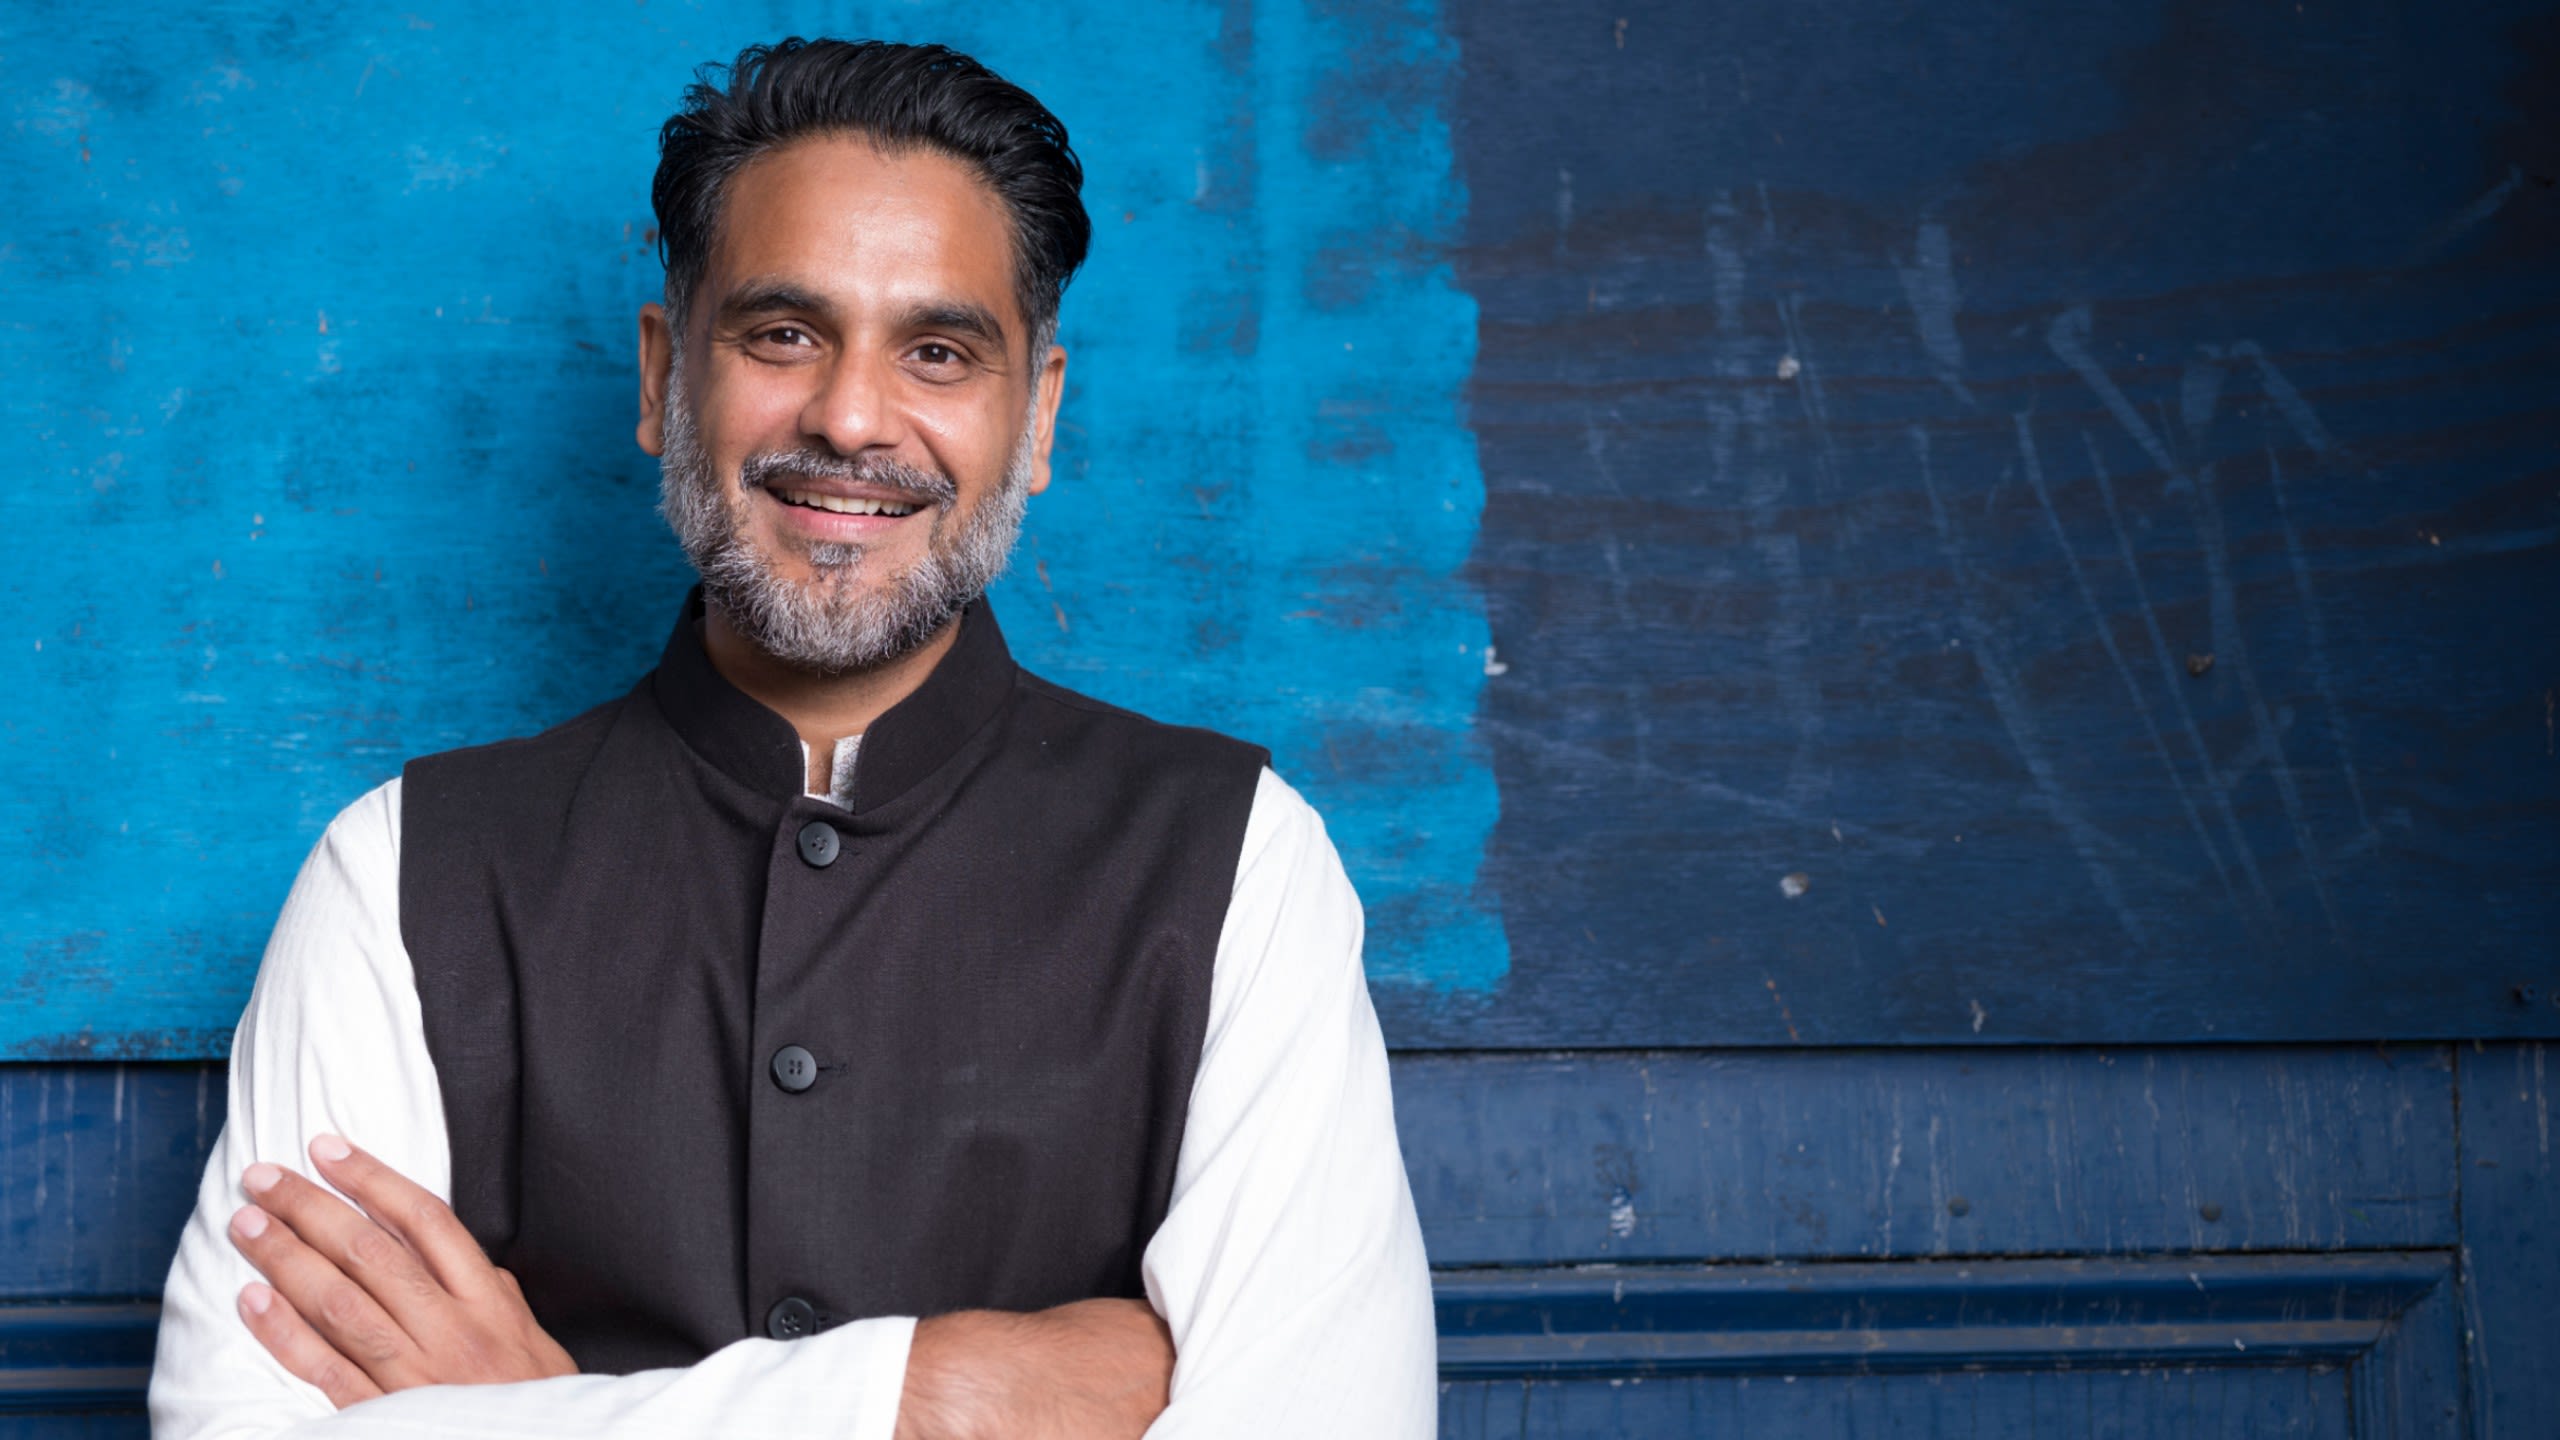 Syed pictured in traditional South Asian ethnic wear called 'shalwar kurta.' He stands against a vibrant blue wall with arms folded and smiles at the camera.